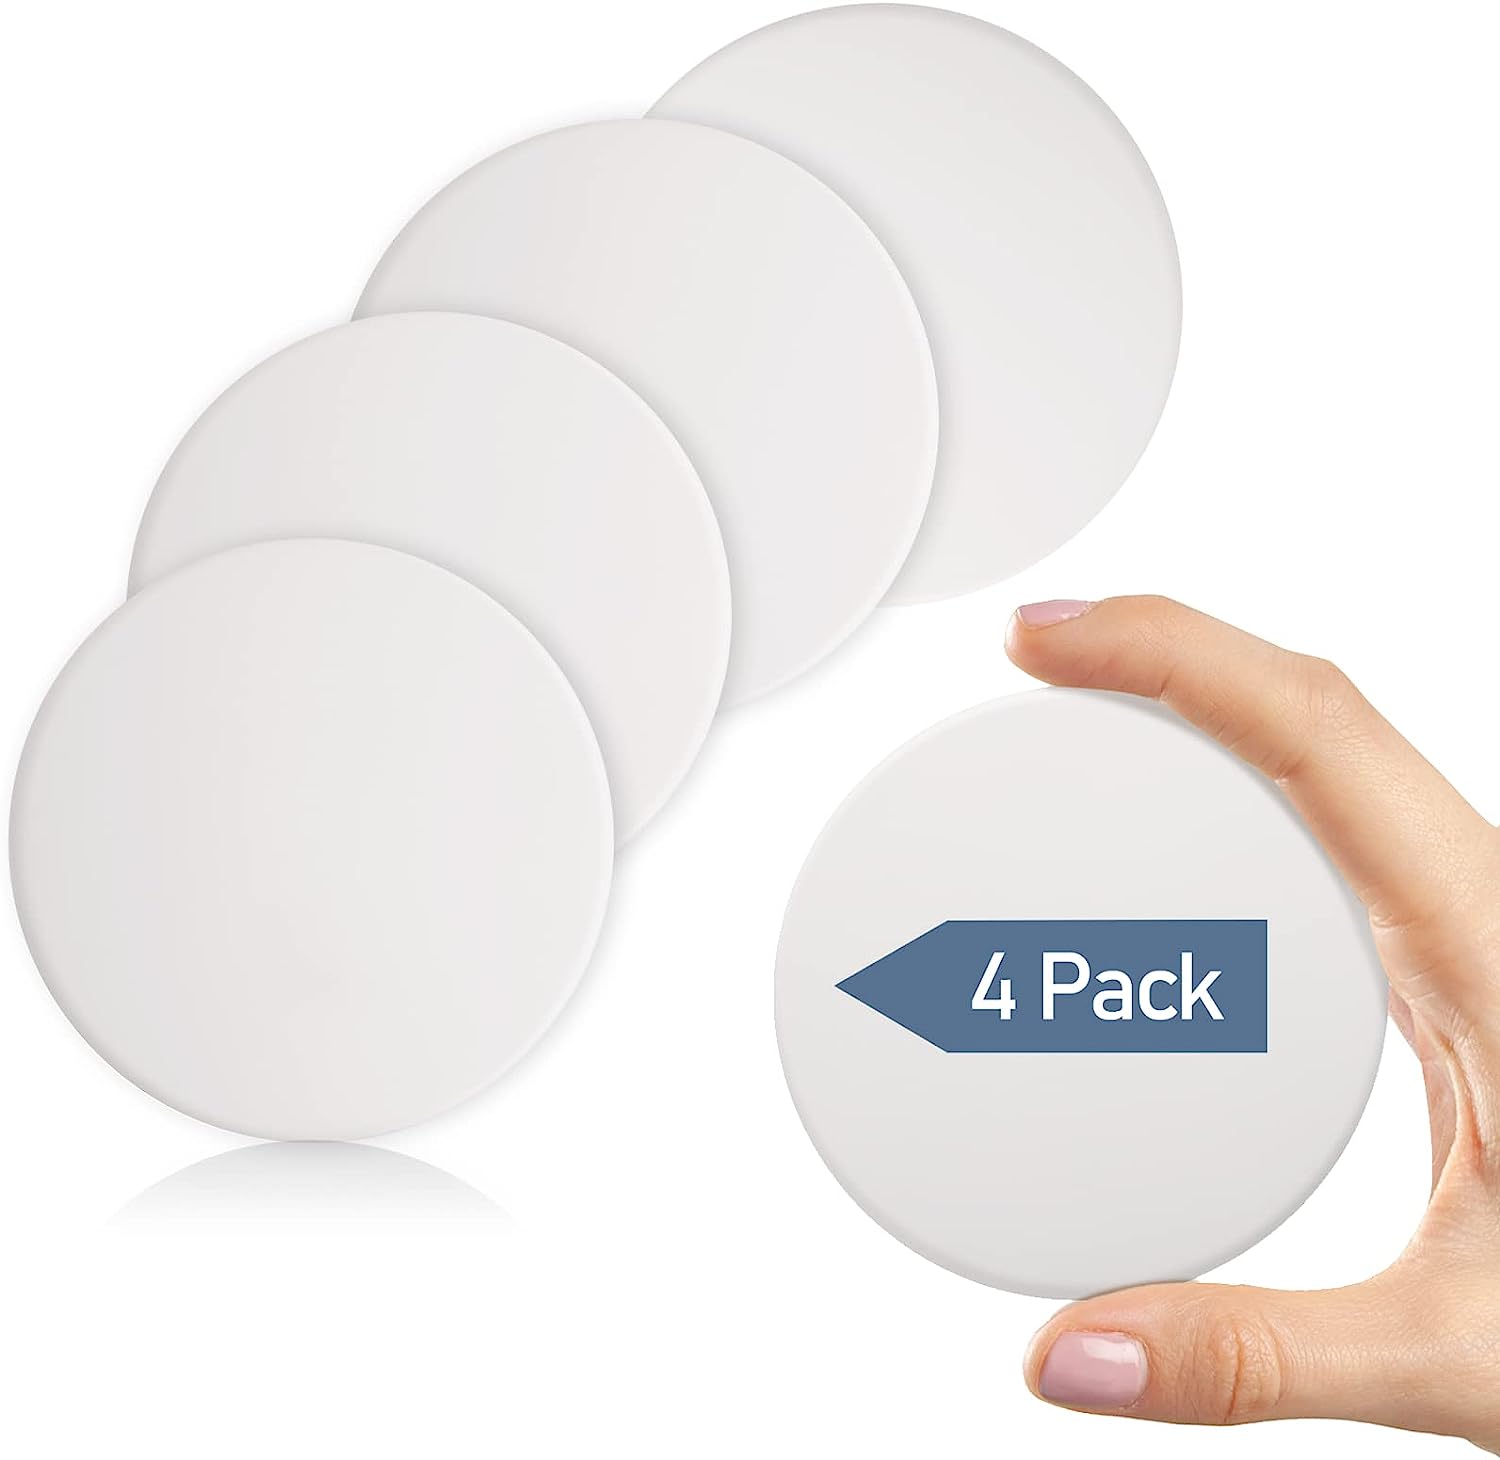 Door Stopper Wall Protector, Larger Silicone Door Knob -Quiet 3.15" Door Handle Bumper with Strong Self Adhesive Sticker and Wall Protection Solution, 4 pcs